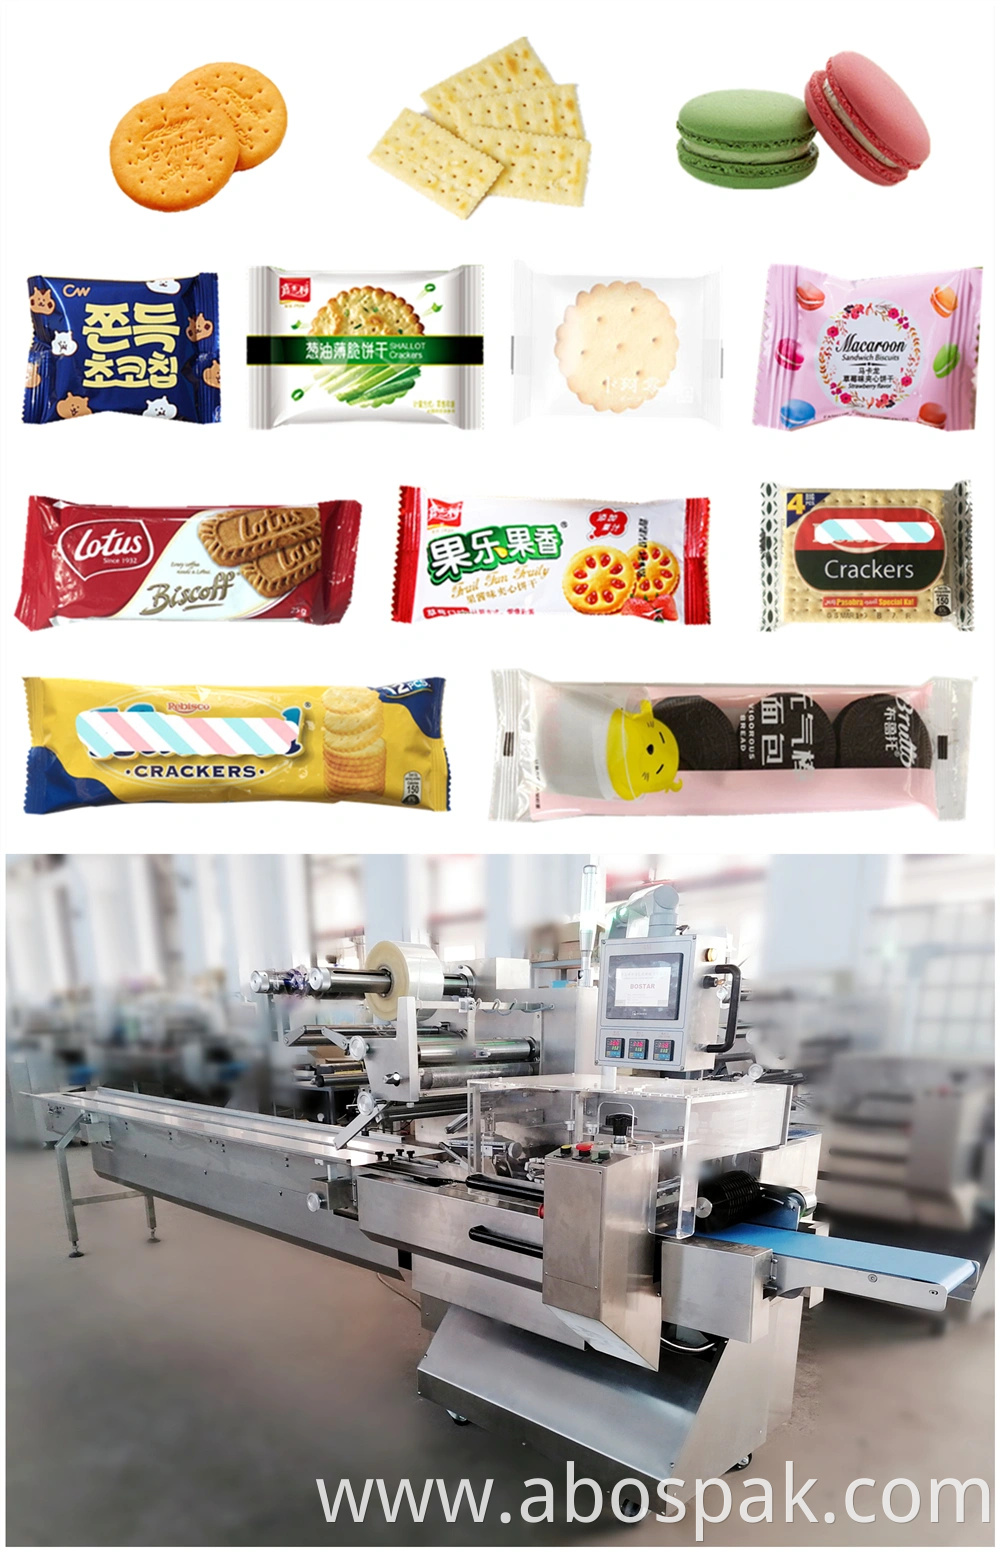 Shandong Qingdao Horizontal Type Fully Automatic Packing Line Packaging Machinery for Biscuit/ Cookie/ Snack/ Mooncake/ Small Food